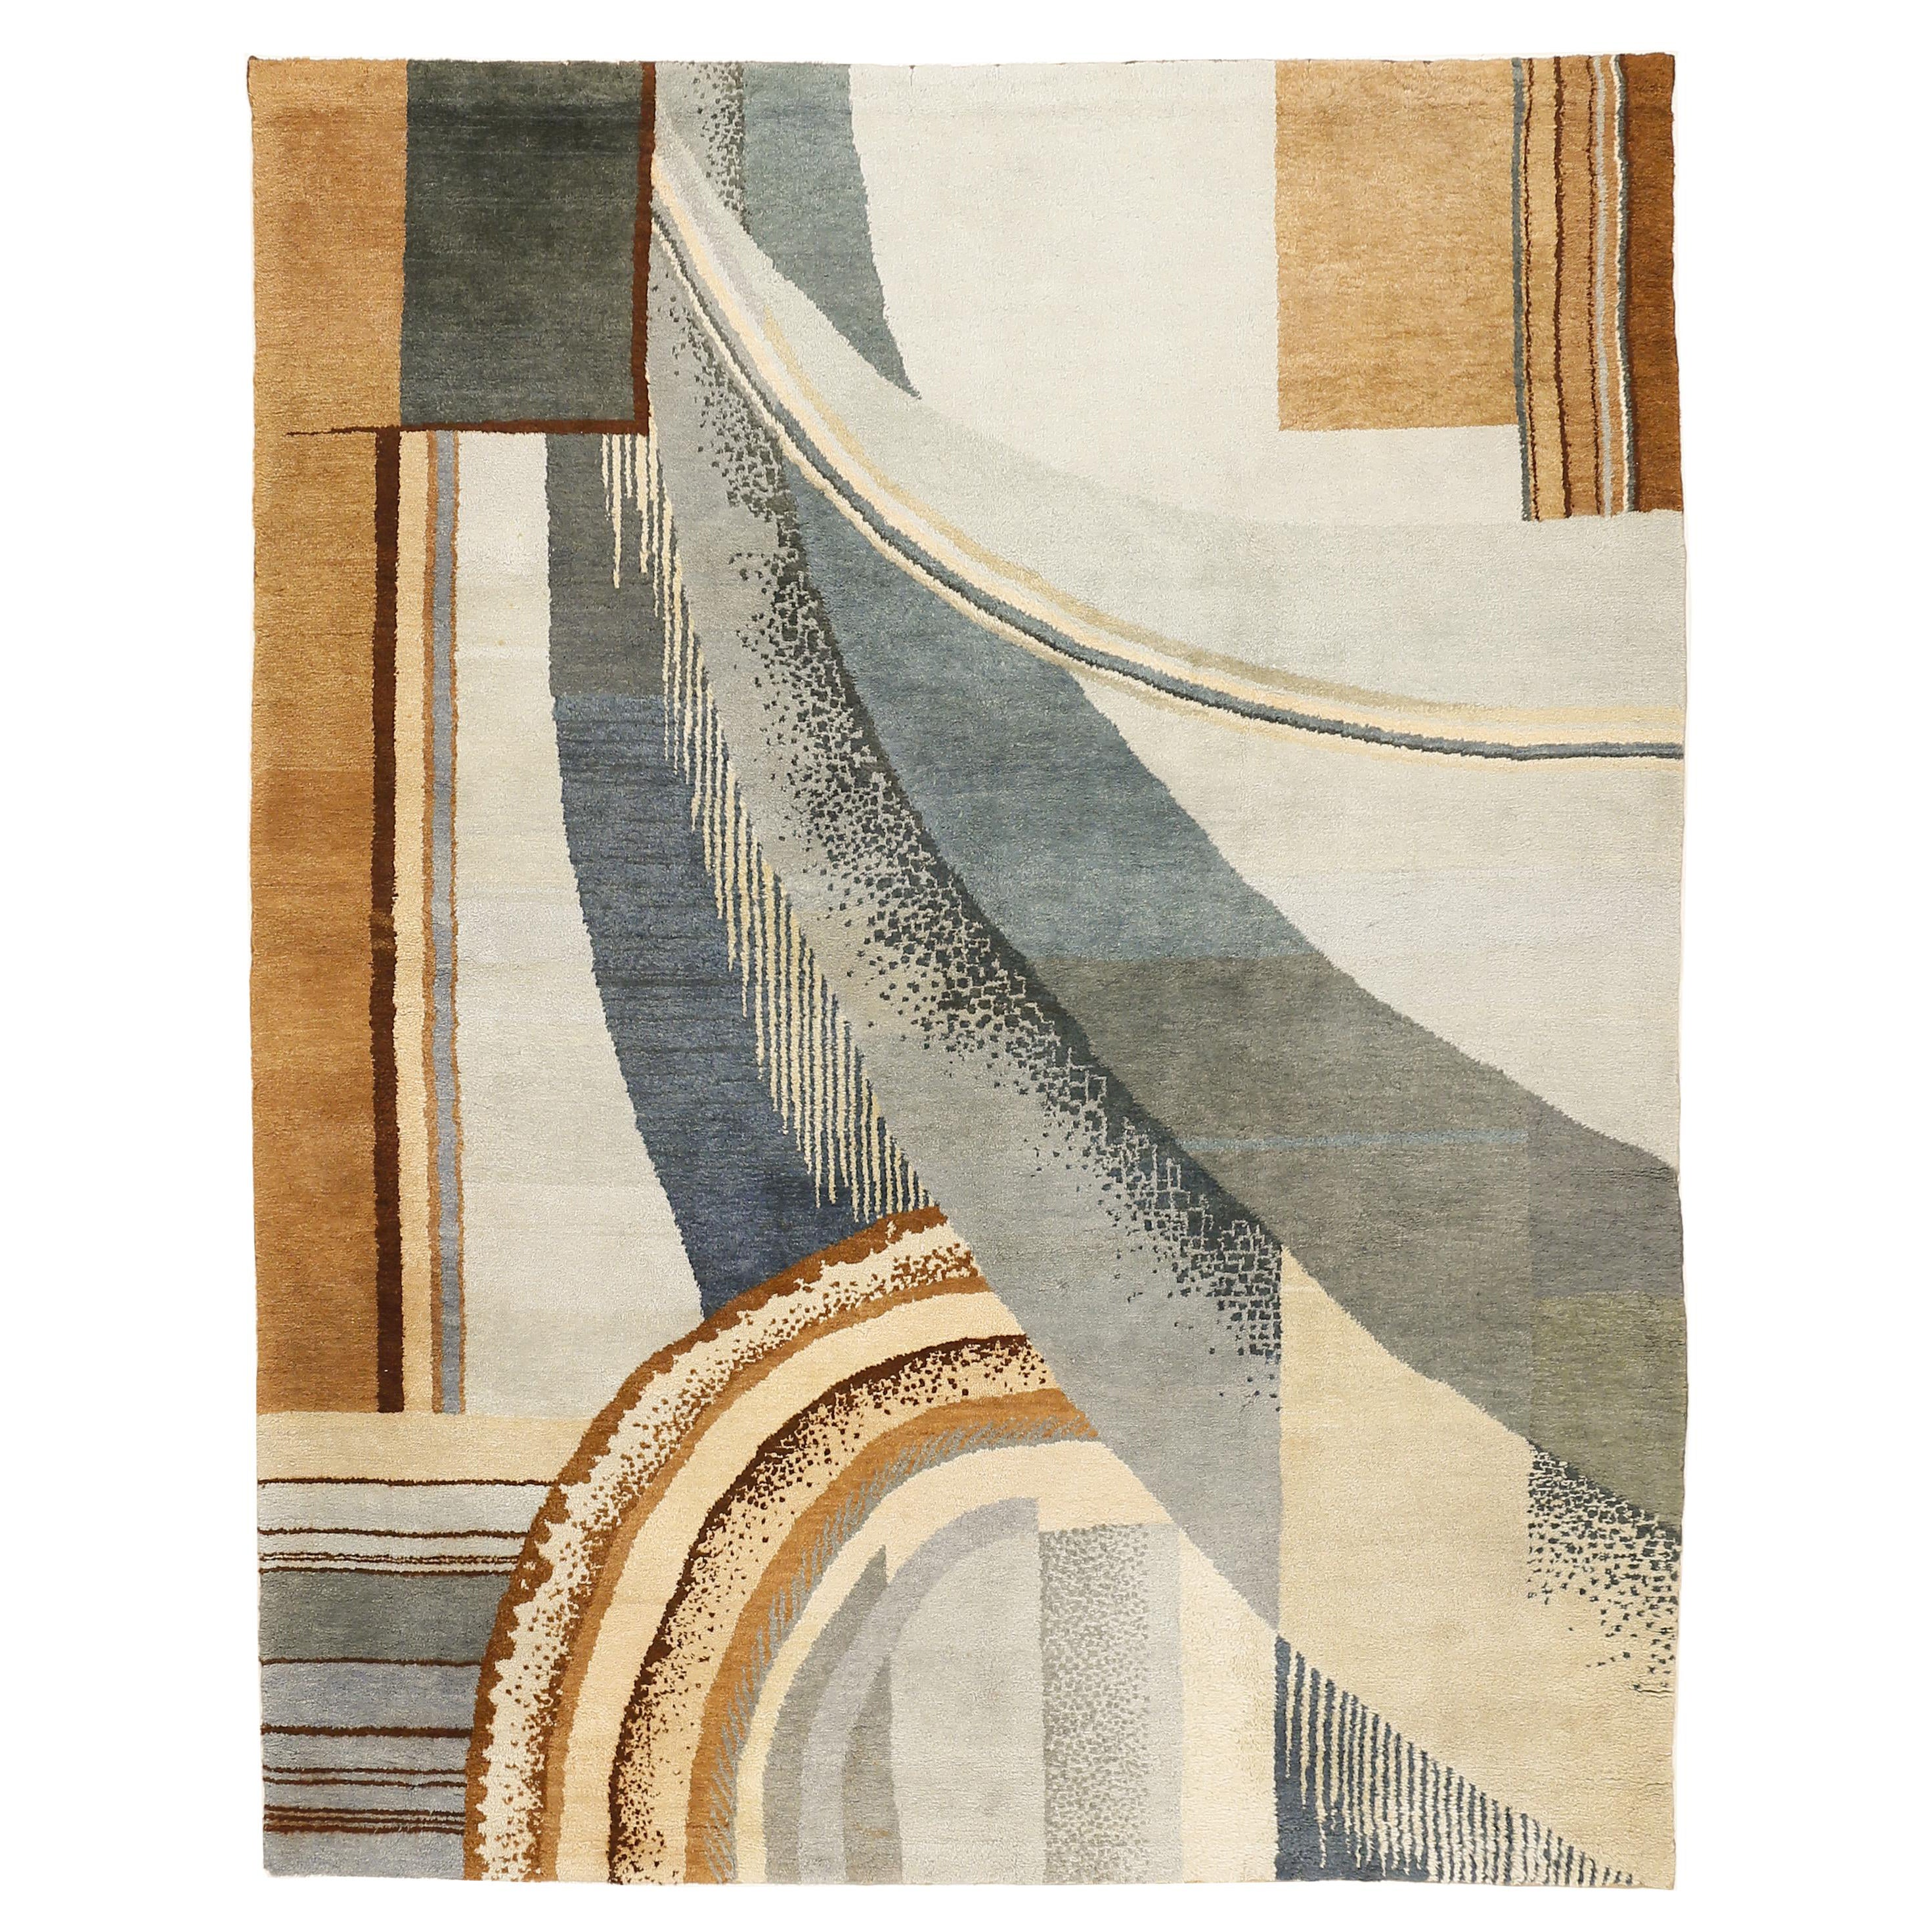 French Art Deco Rug Designed by Jean Burkhalter for Pierre Chareau Circa 1925